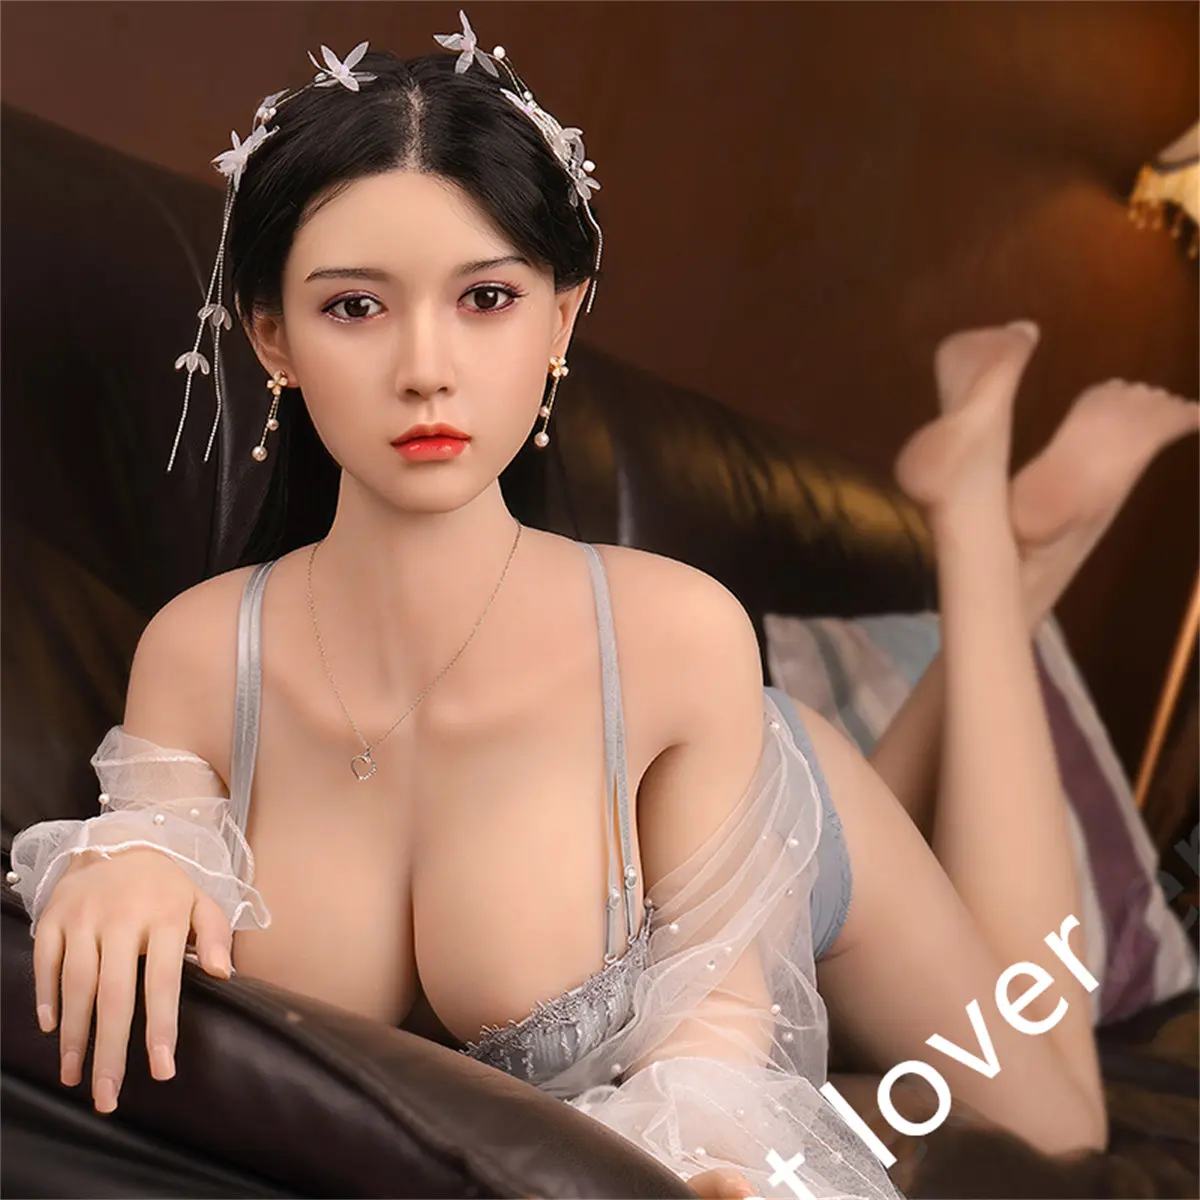 

For Men Bjd Sex Doll Little Maid Works You Out Sex Doll Torso Sexdoll The Sexy Model Number Item Type Material Origin